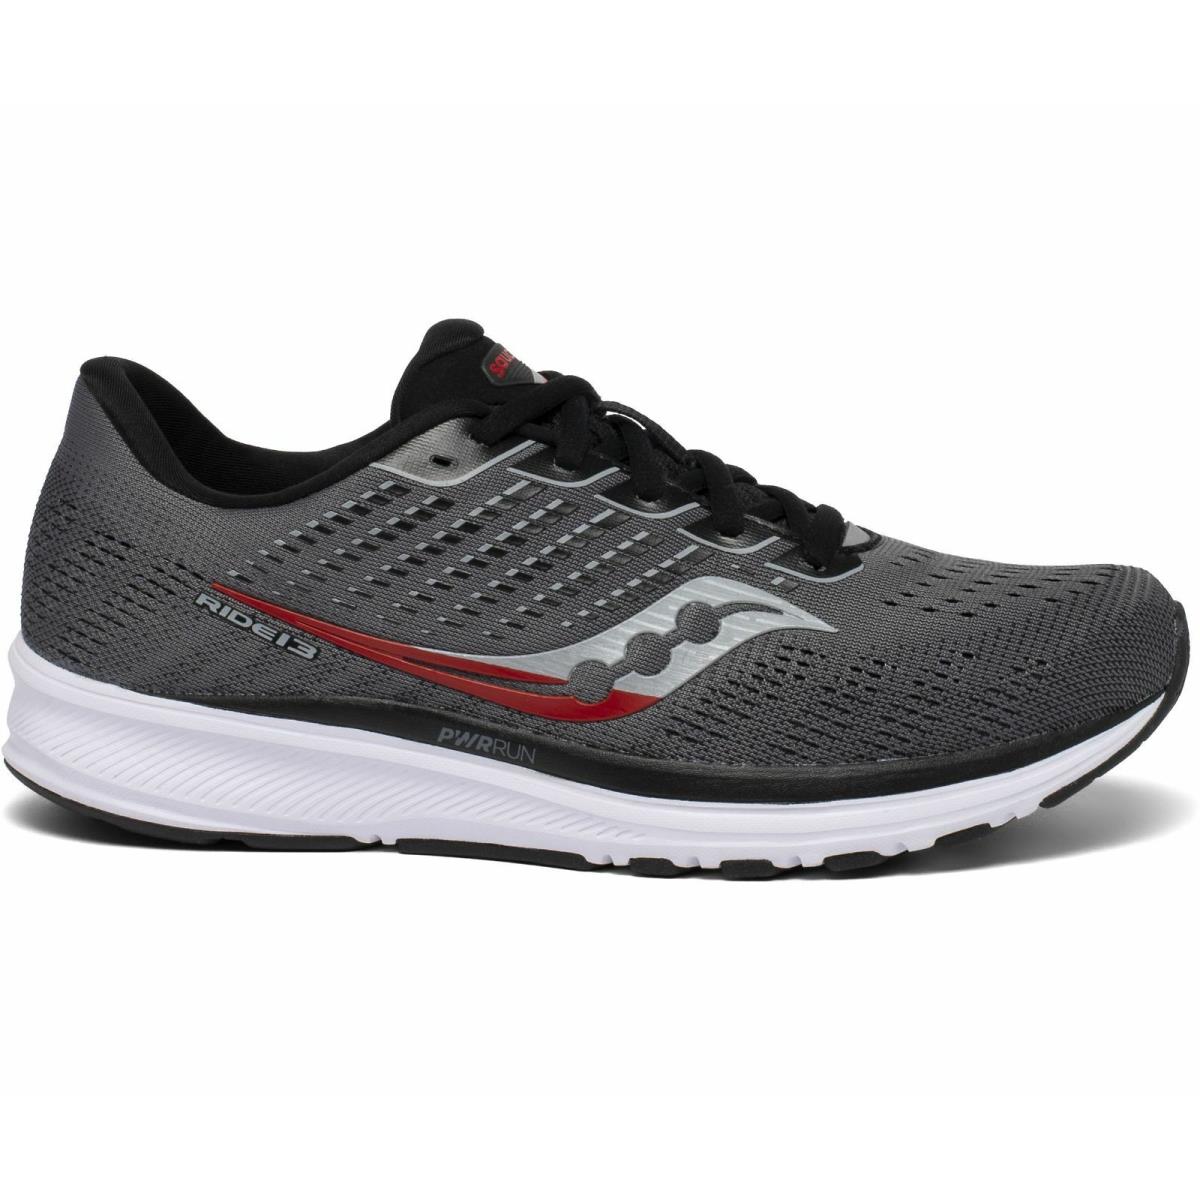 Saucony Ride 13 Running Shoes Mens 8.5 Wide Charcoal/black